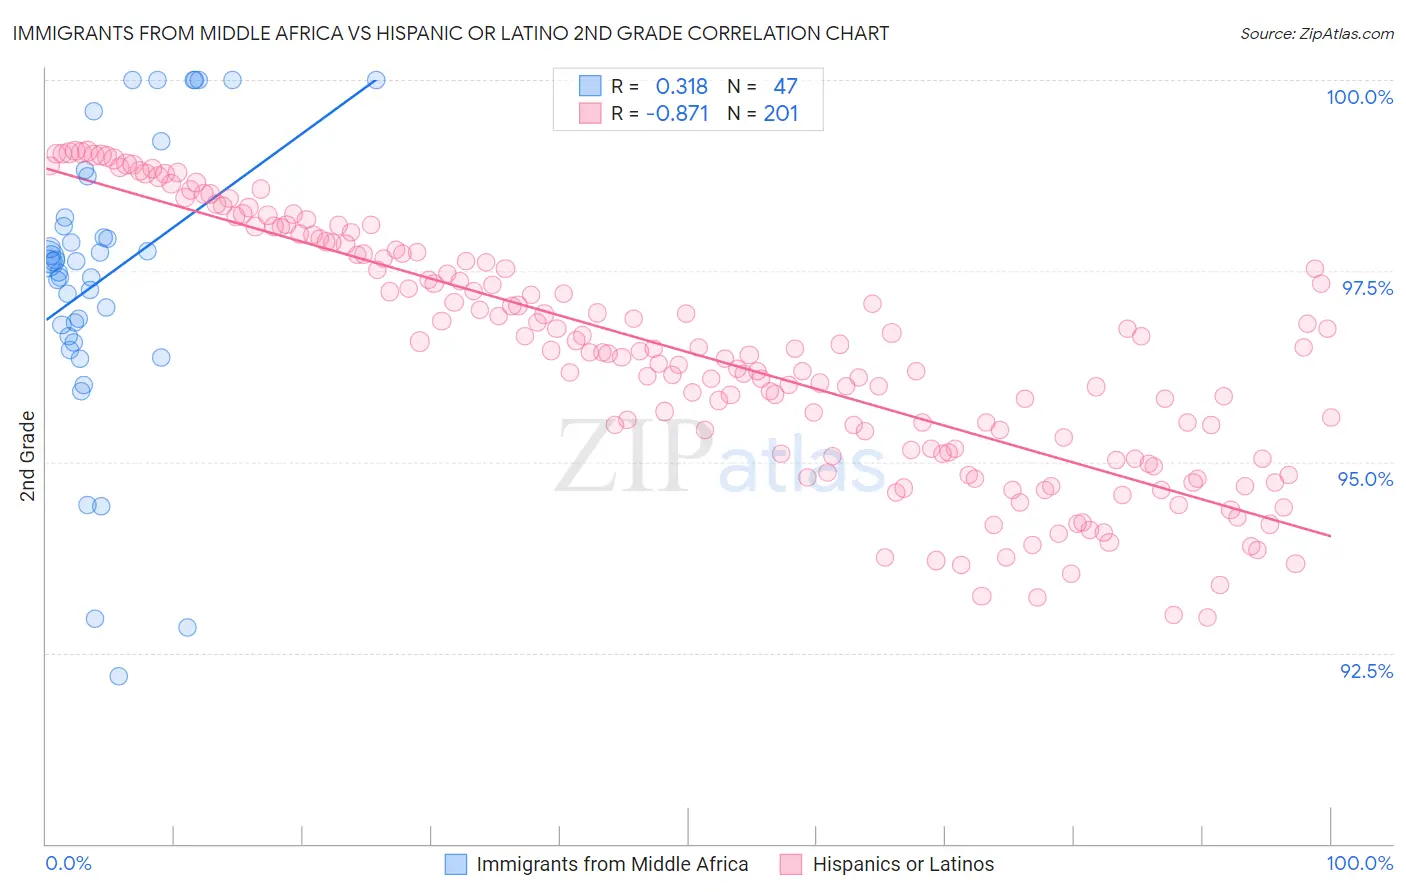 Immigrants from Middle Africa vs Hispanic or Latino 2nd Grade